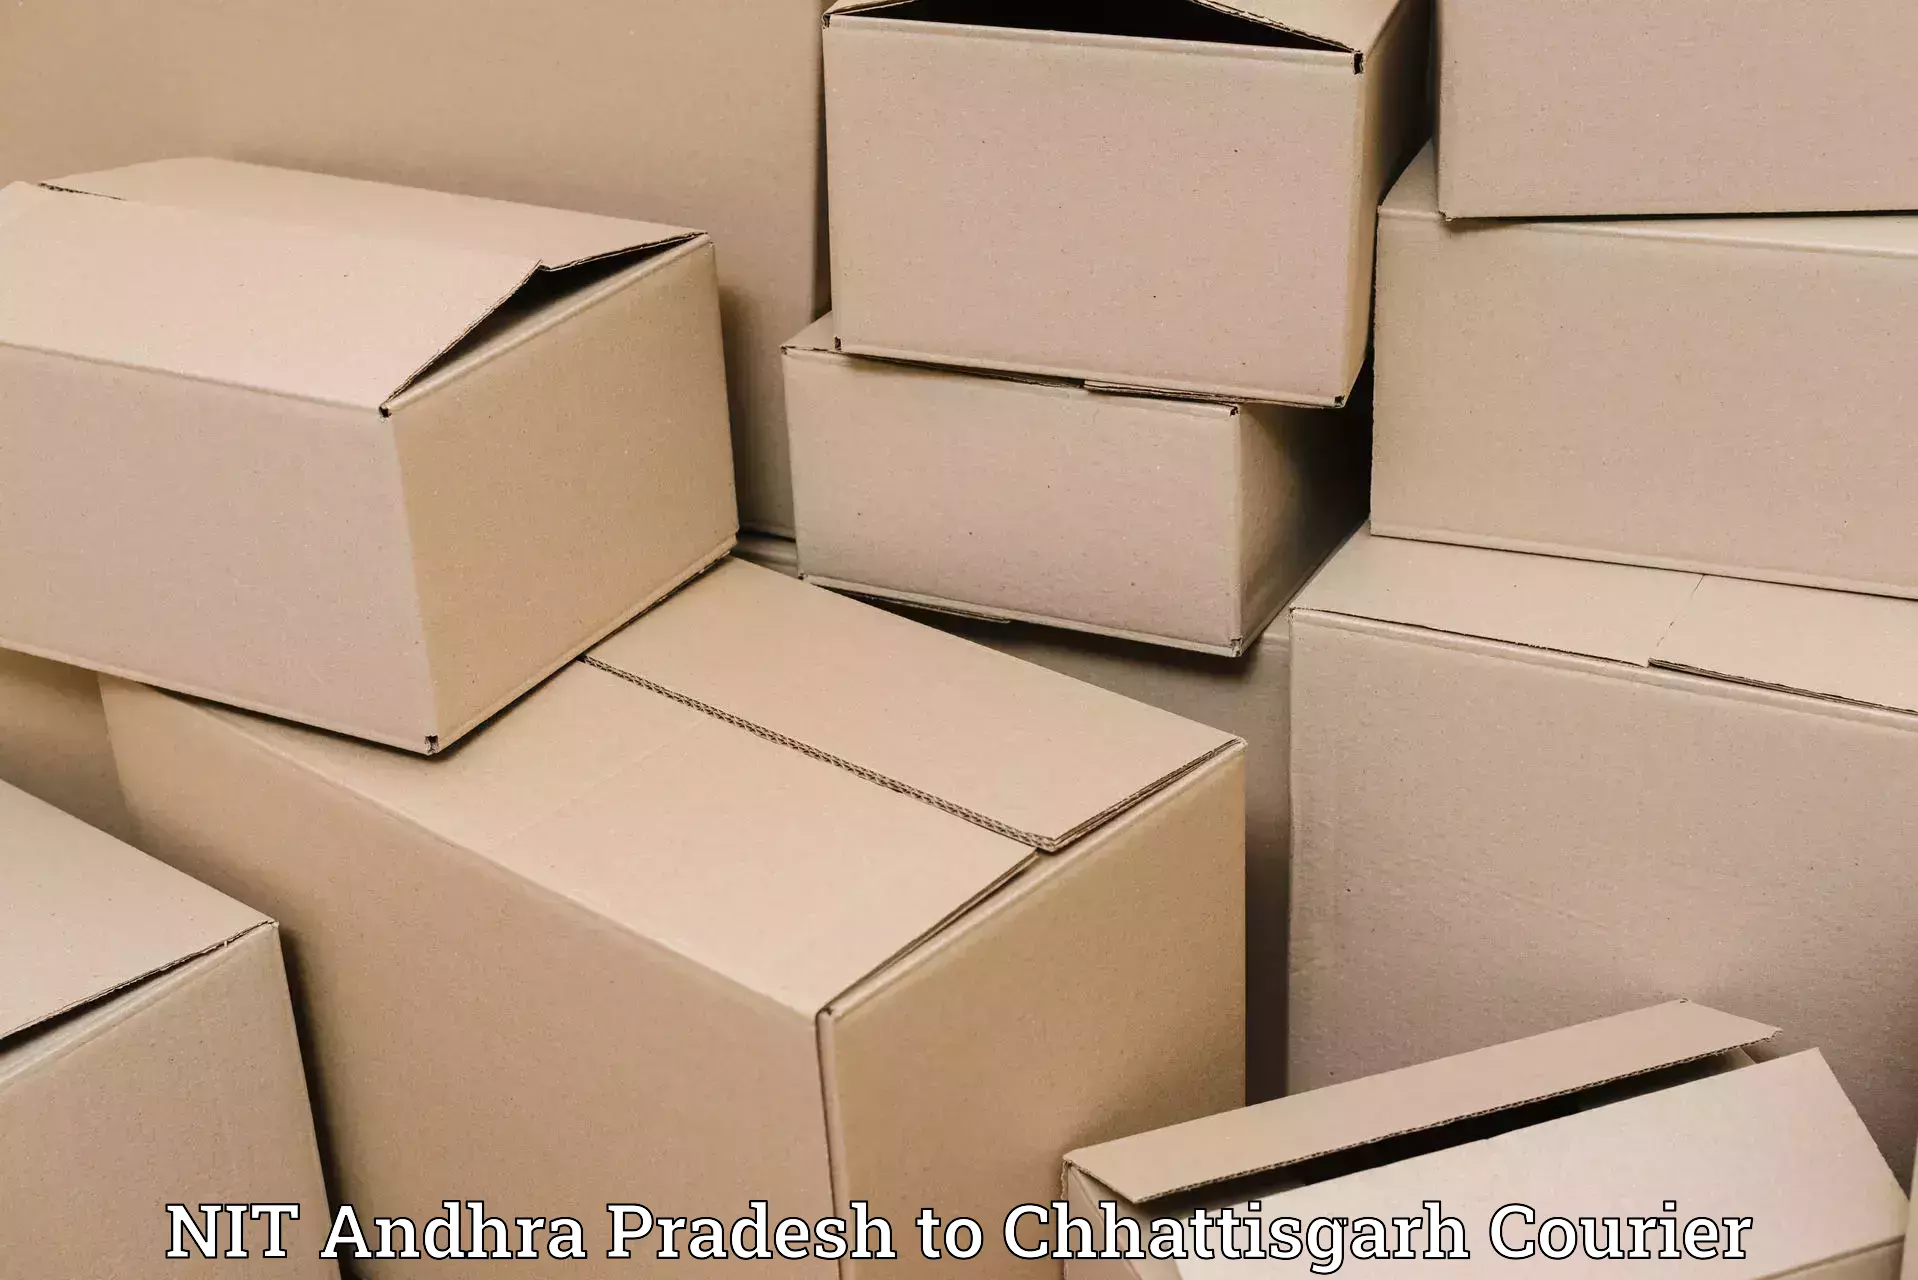 Specialized courier services NIT Andhra Pradesh to Raipur